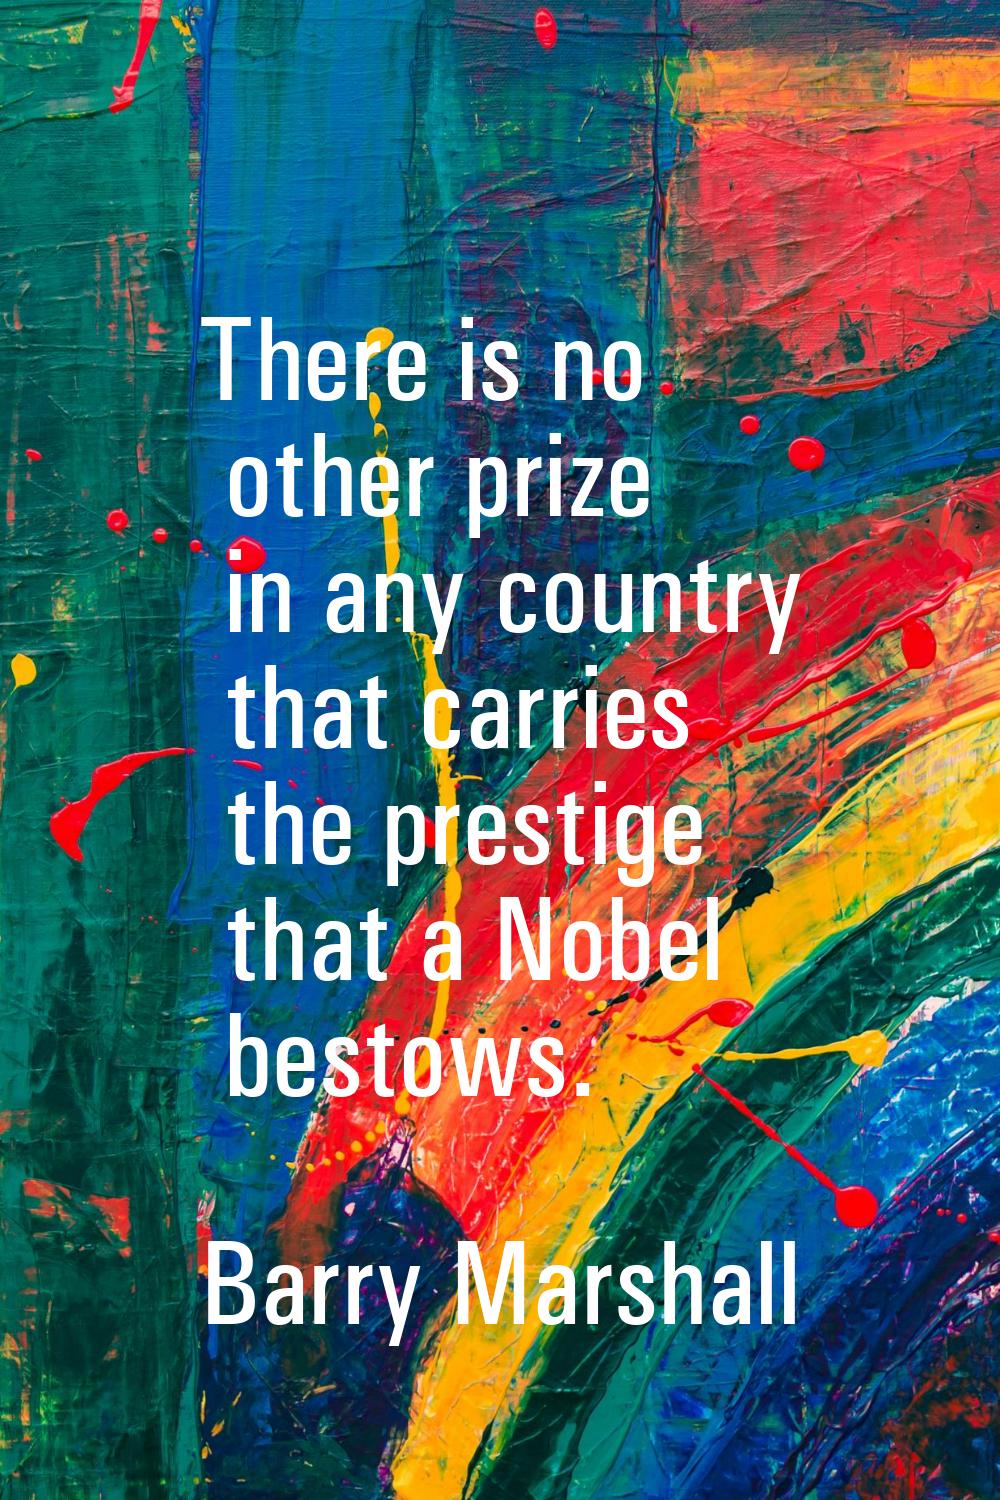 There is no other prize in any country that carries the prestige that a Nobel bestows.